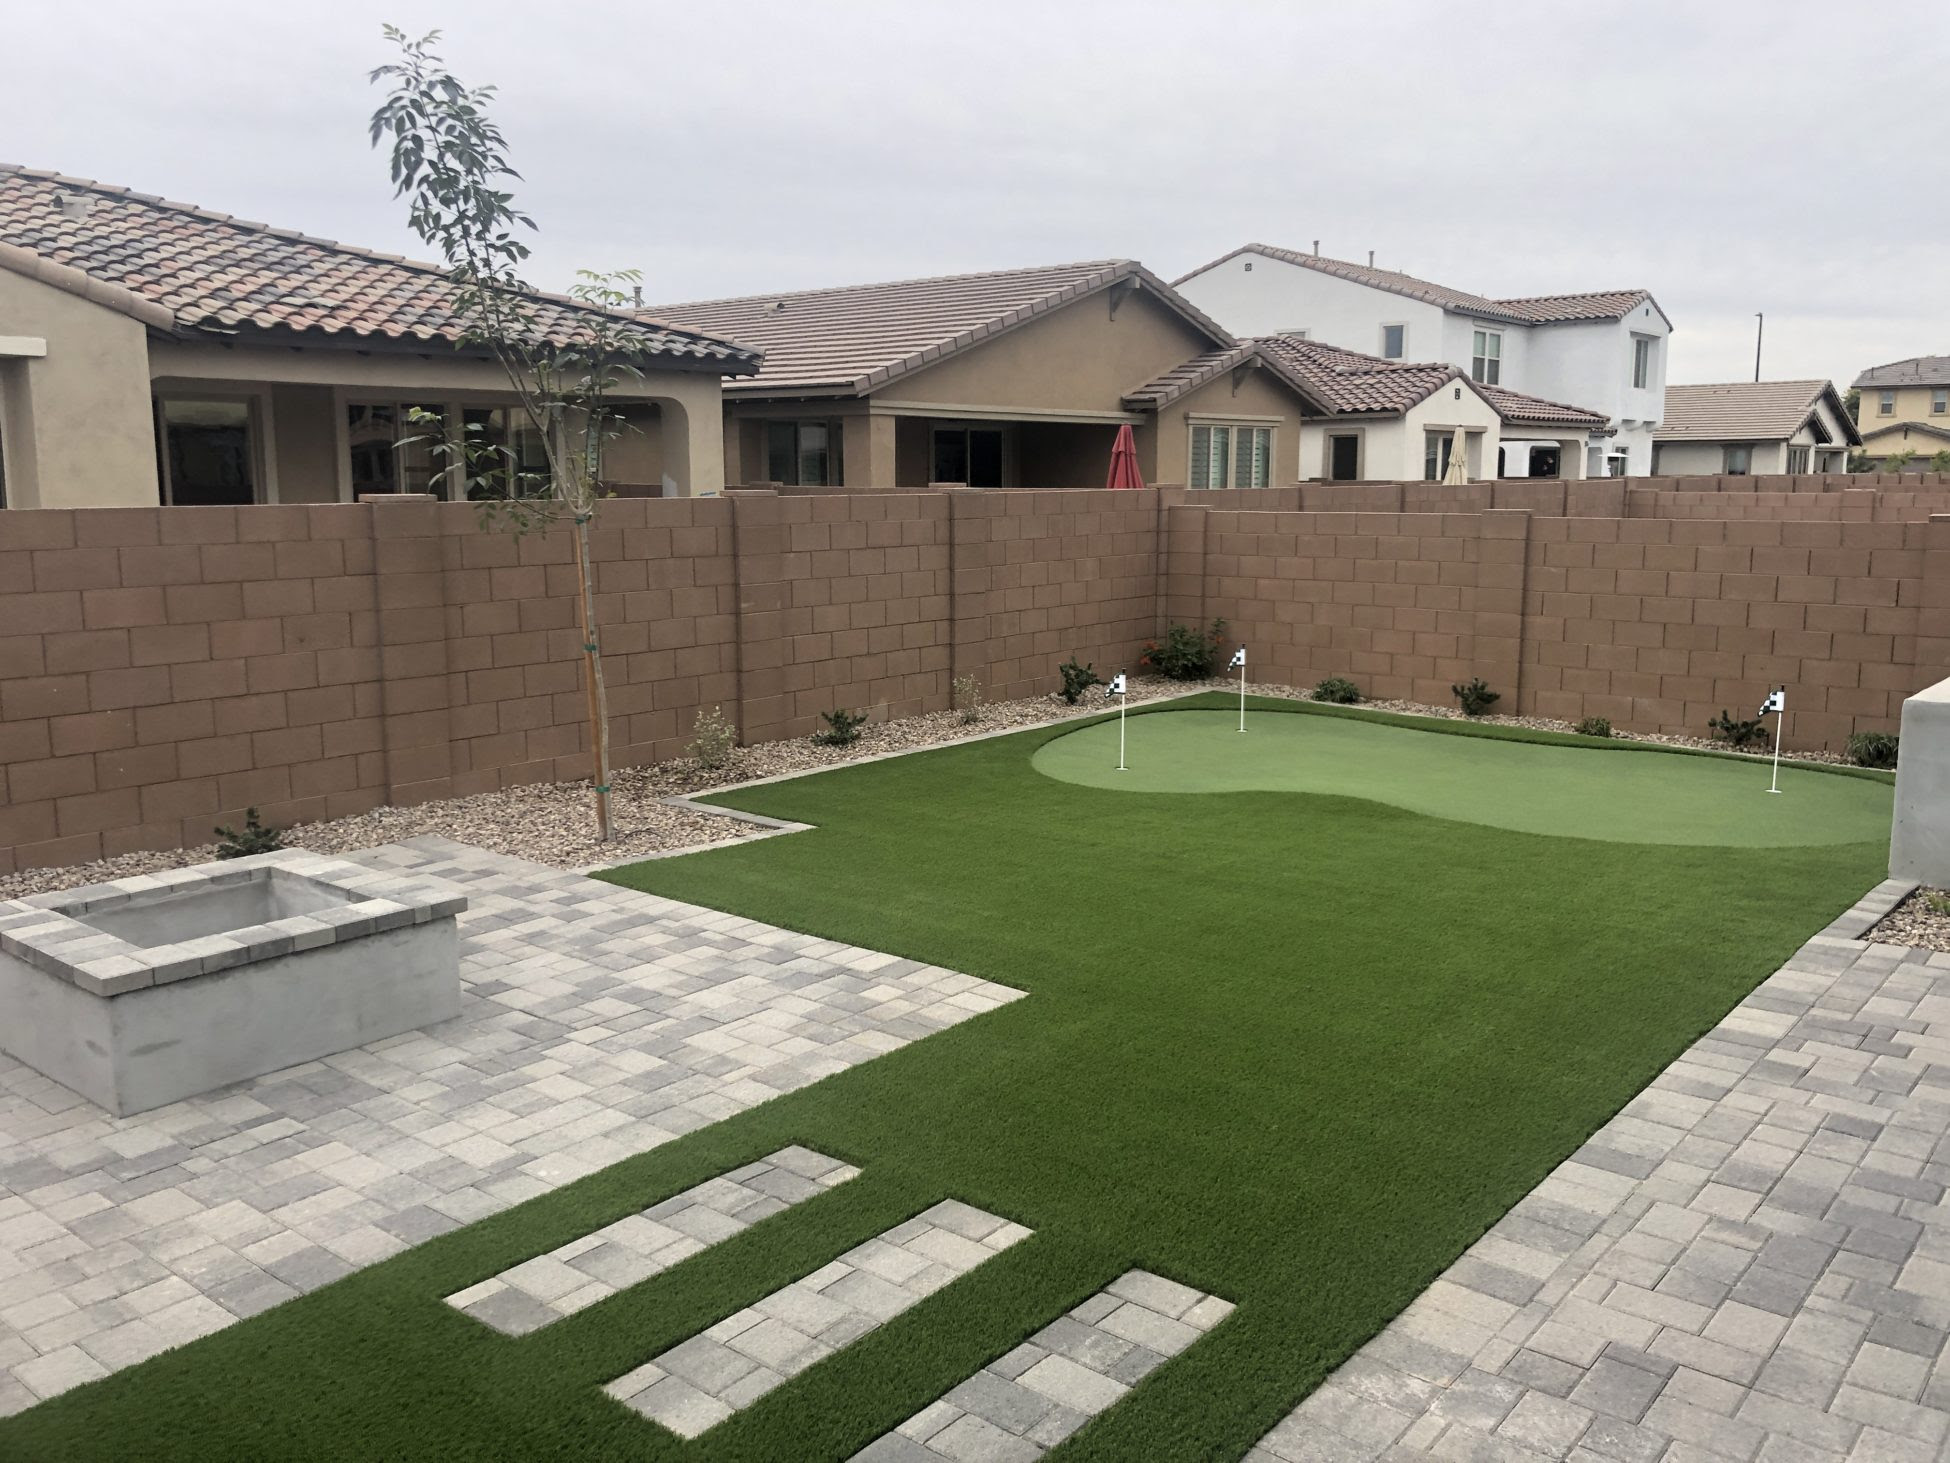 Check It Out Outdoor Putting Green In Arizona Backyard Landscape